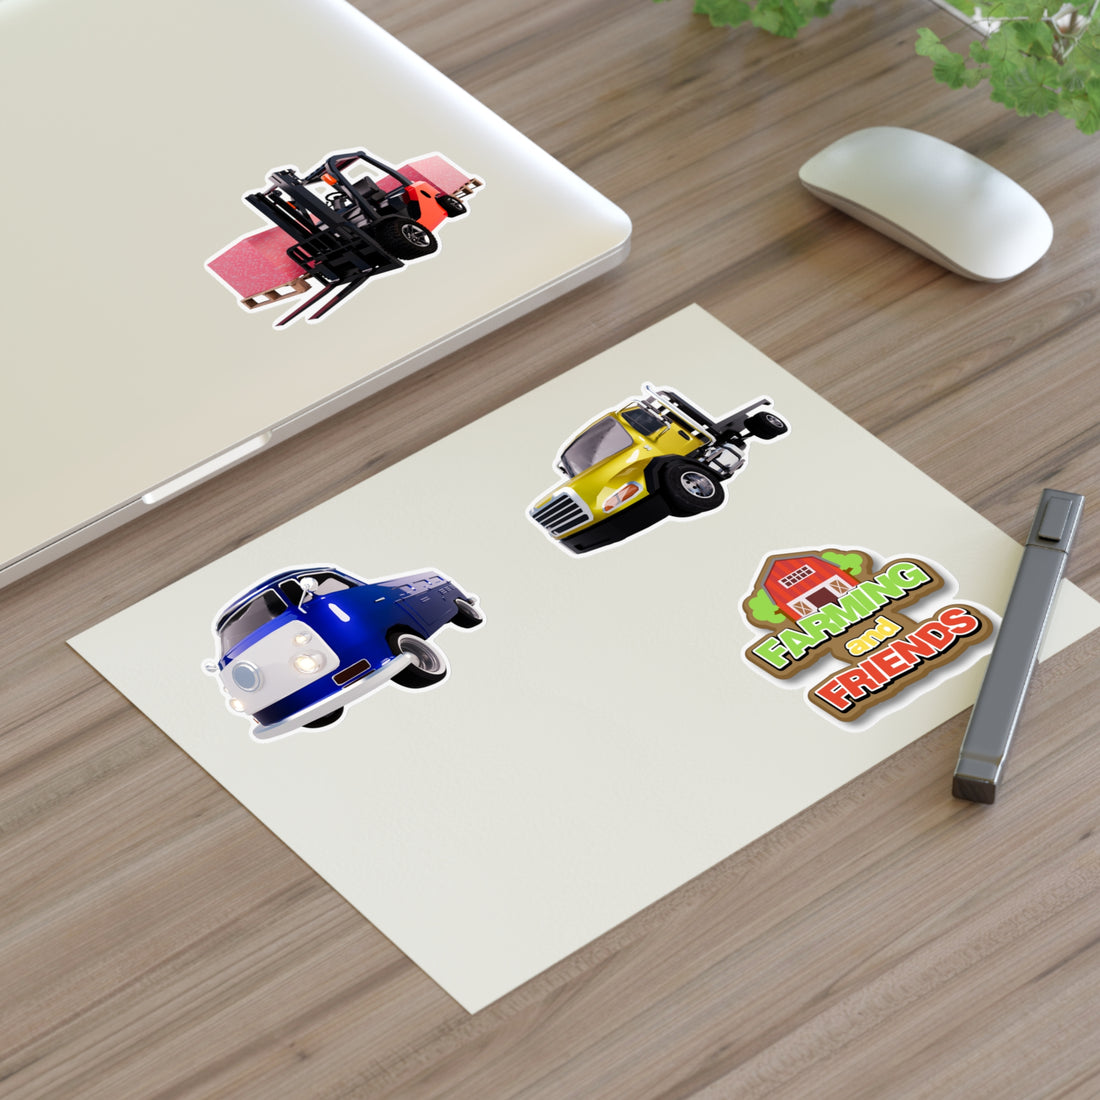 Farming and Friends - Vehicle Sticker Pack Sheet 2nd Collection (1pc)